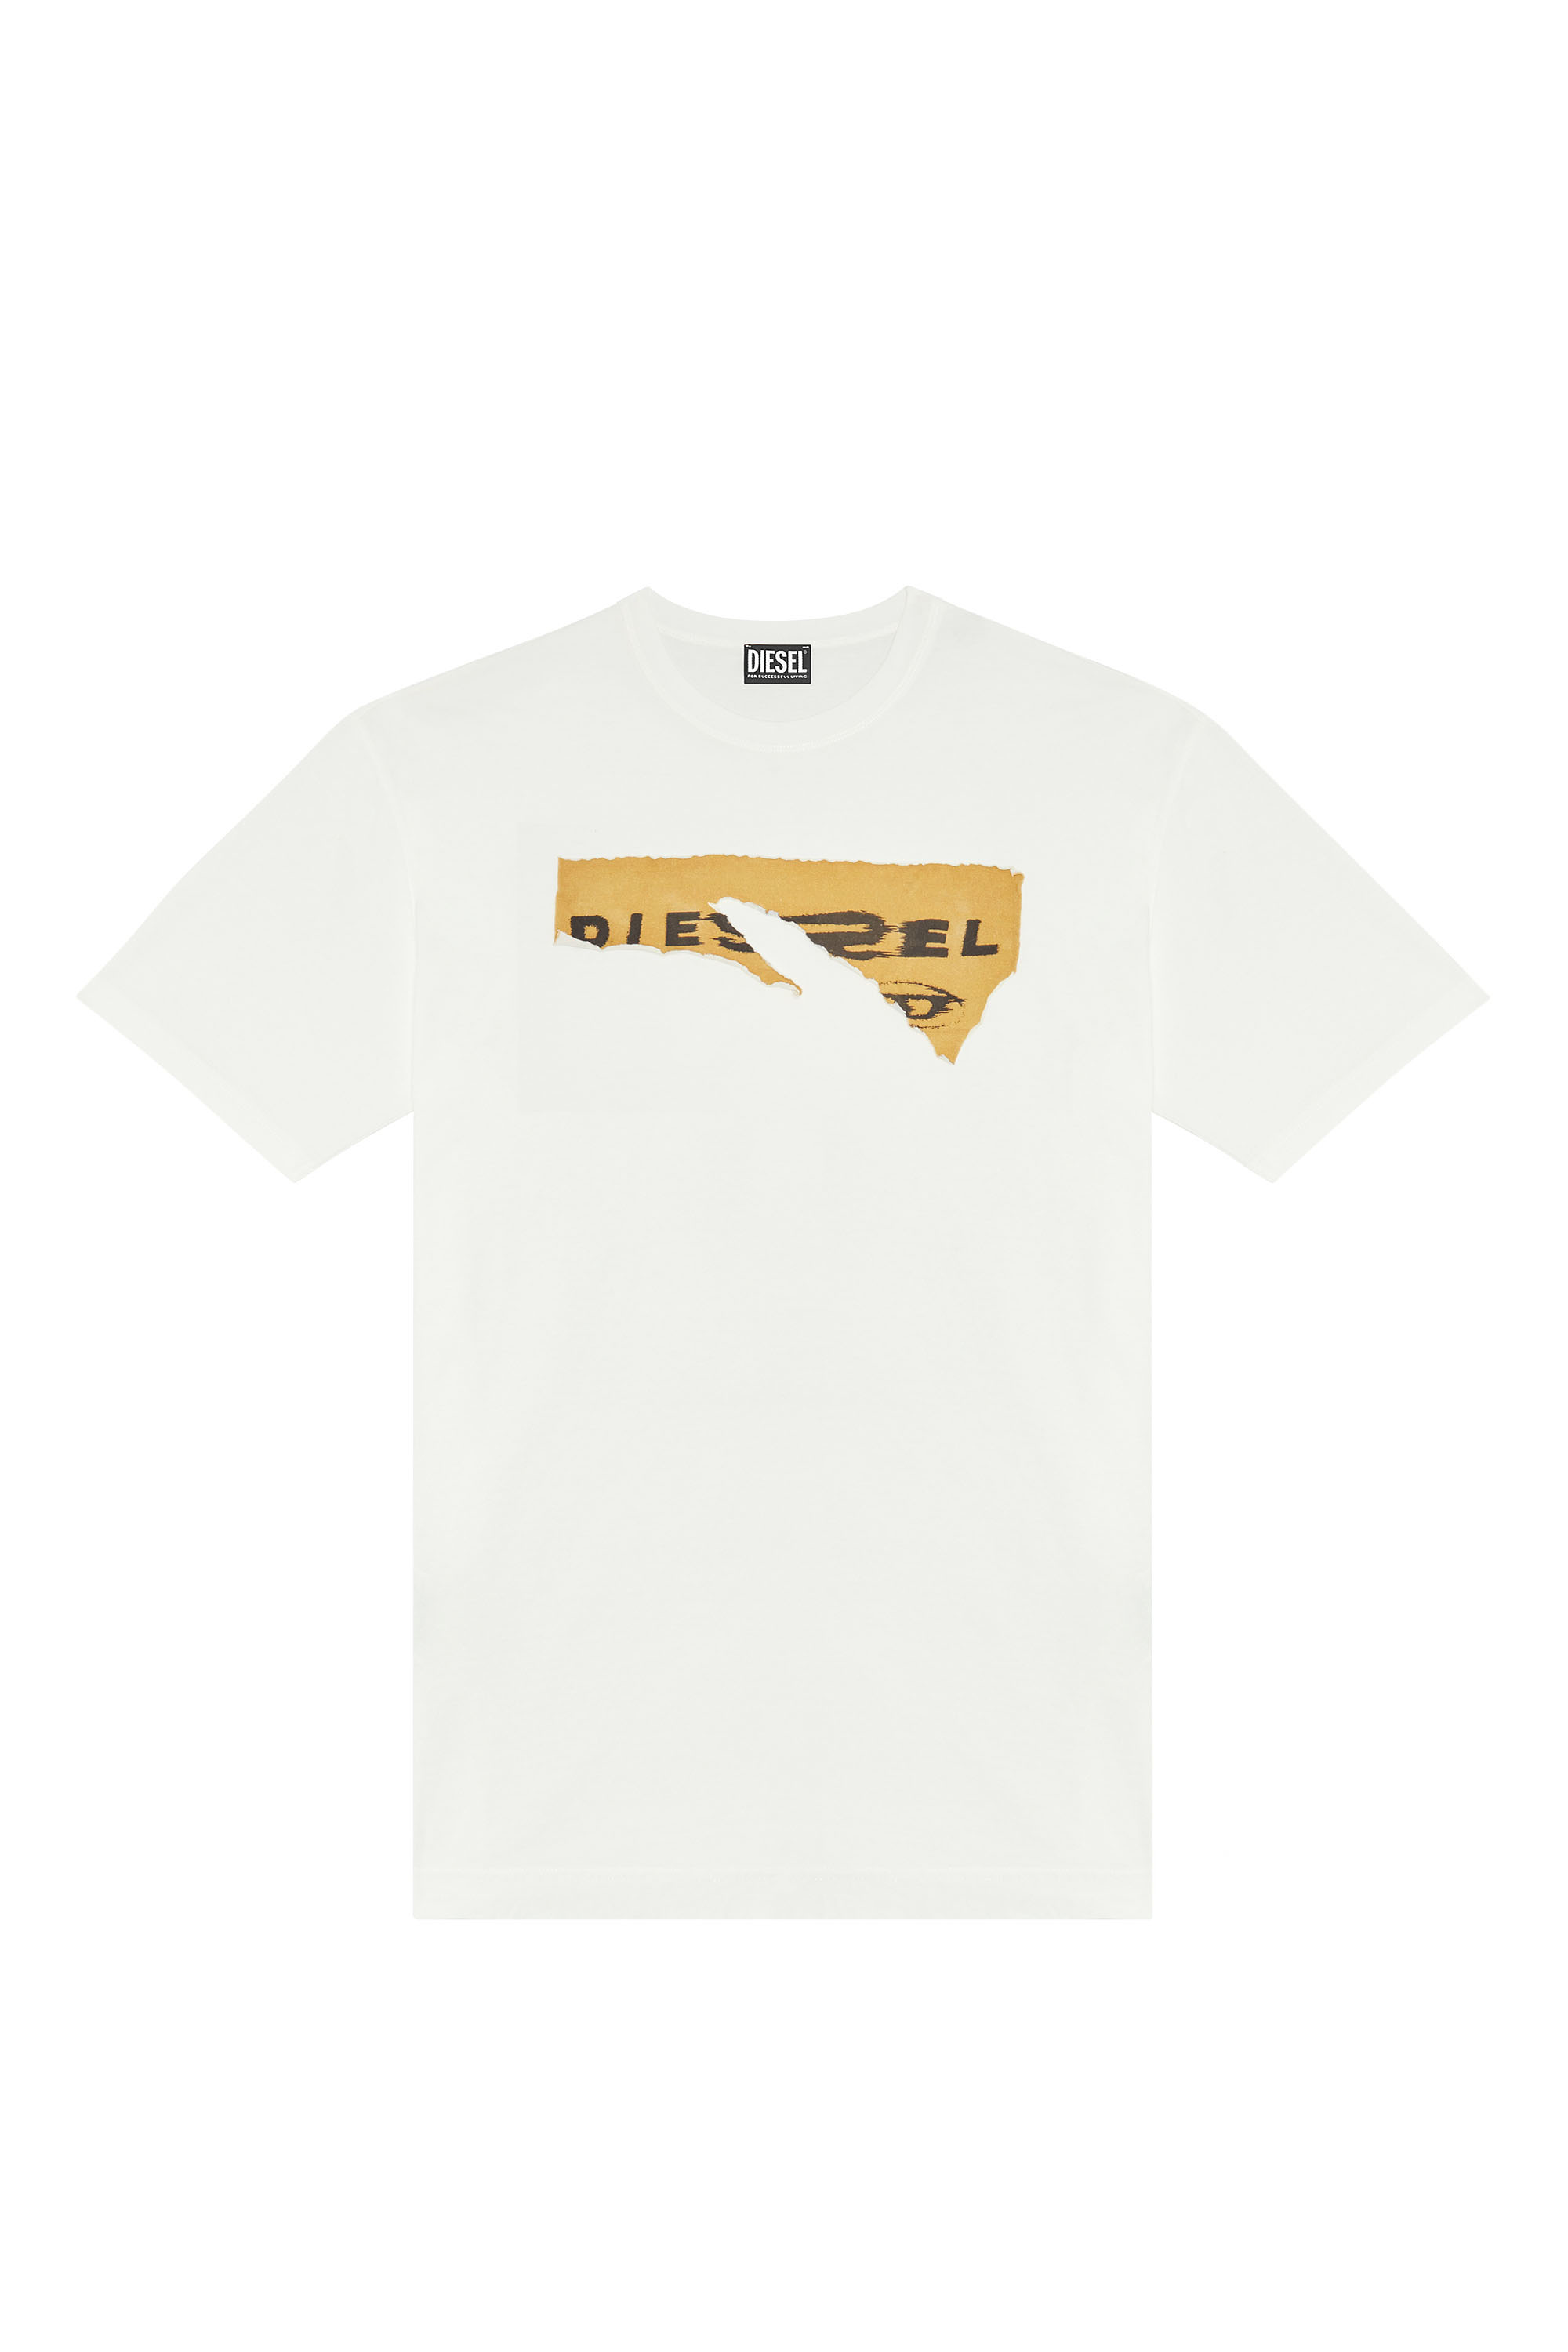 T-WASH-POFF Man: T-shirt with peel-off patches | Diesel